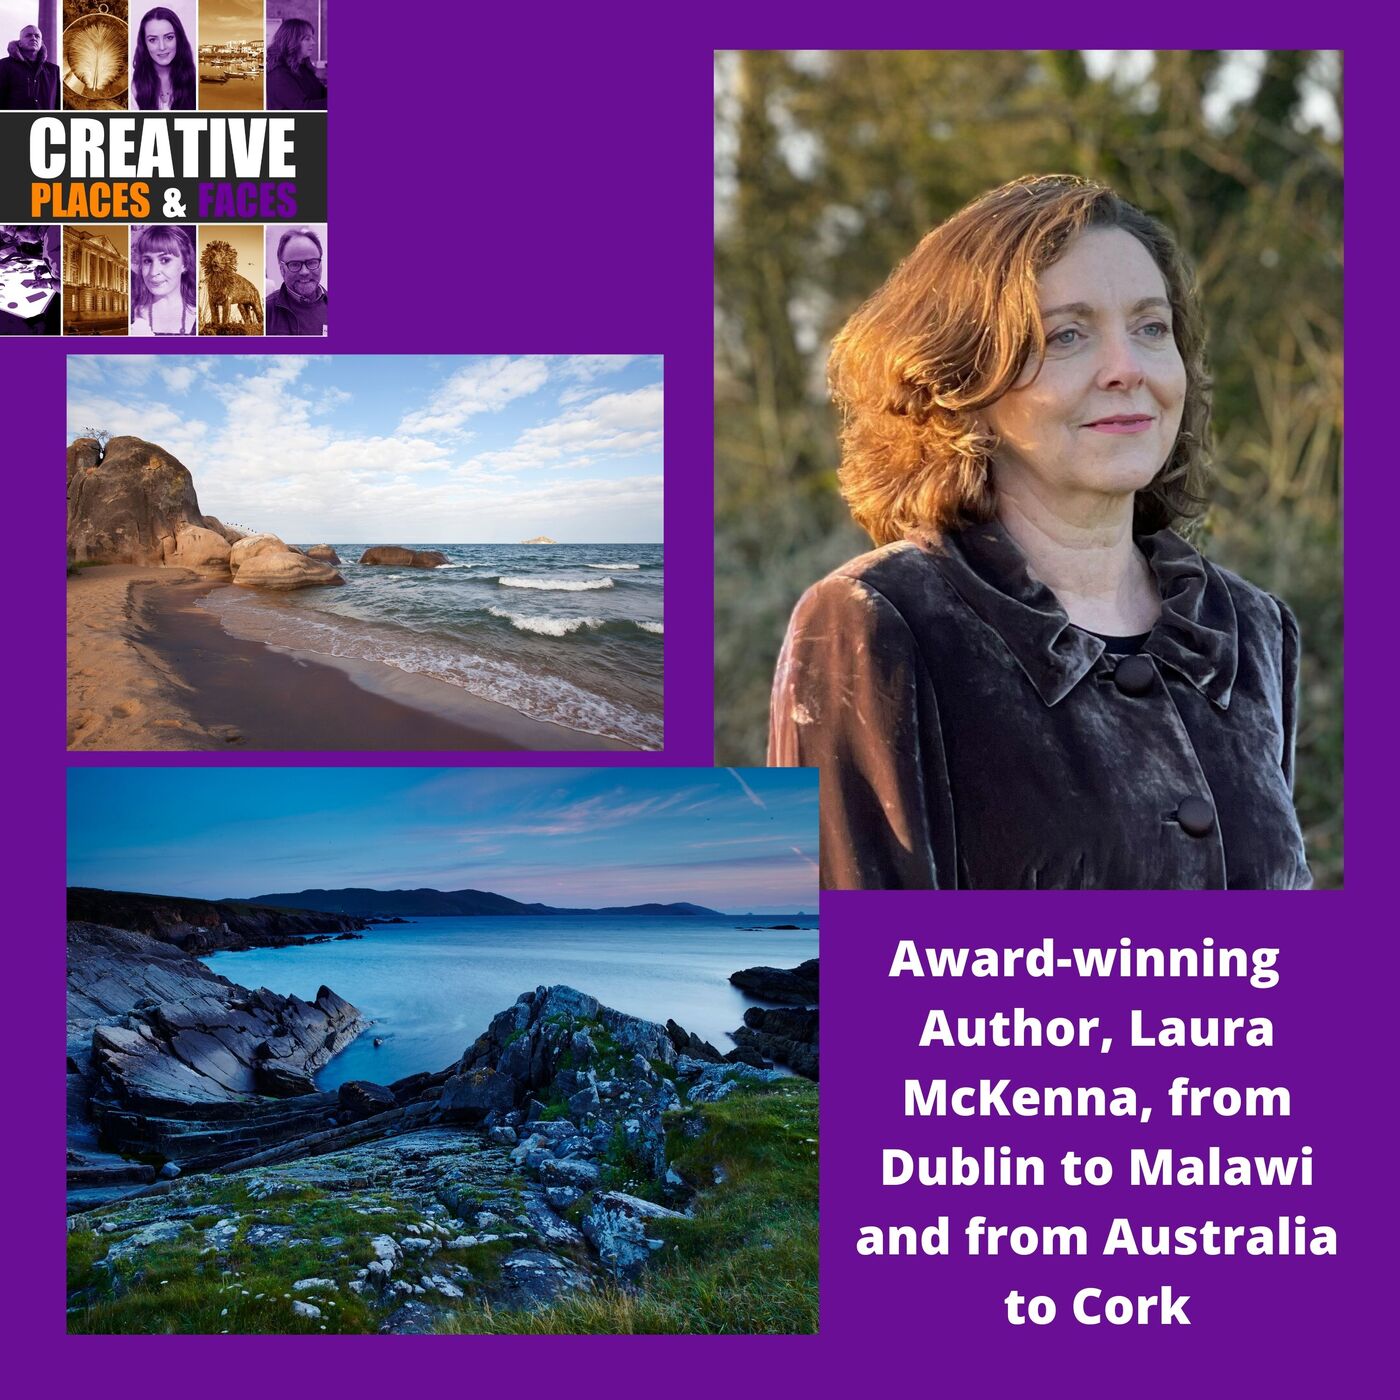 Award-winning History Loving Author, Laura McKenna, from Dublin to Malawi and from Australia to Cork